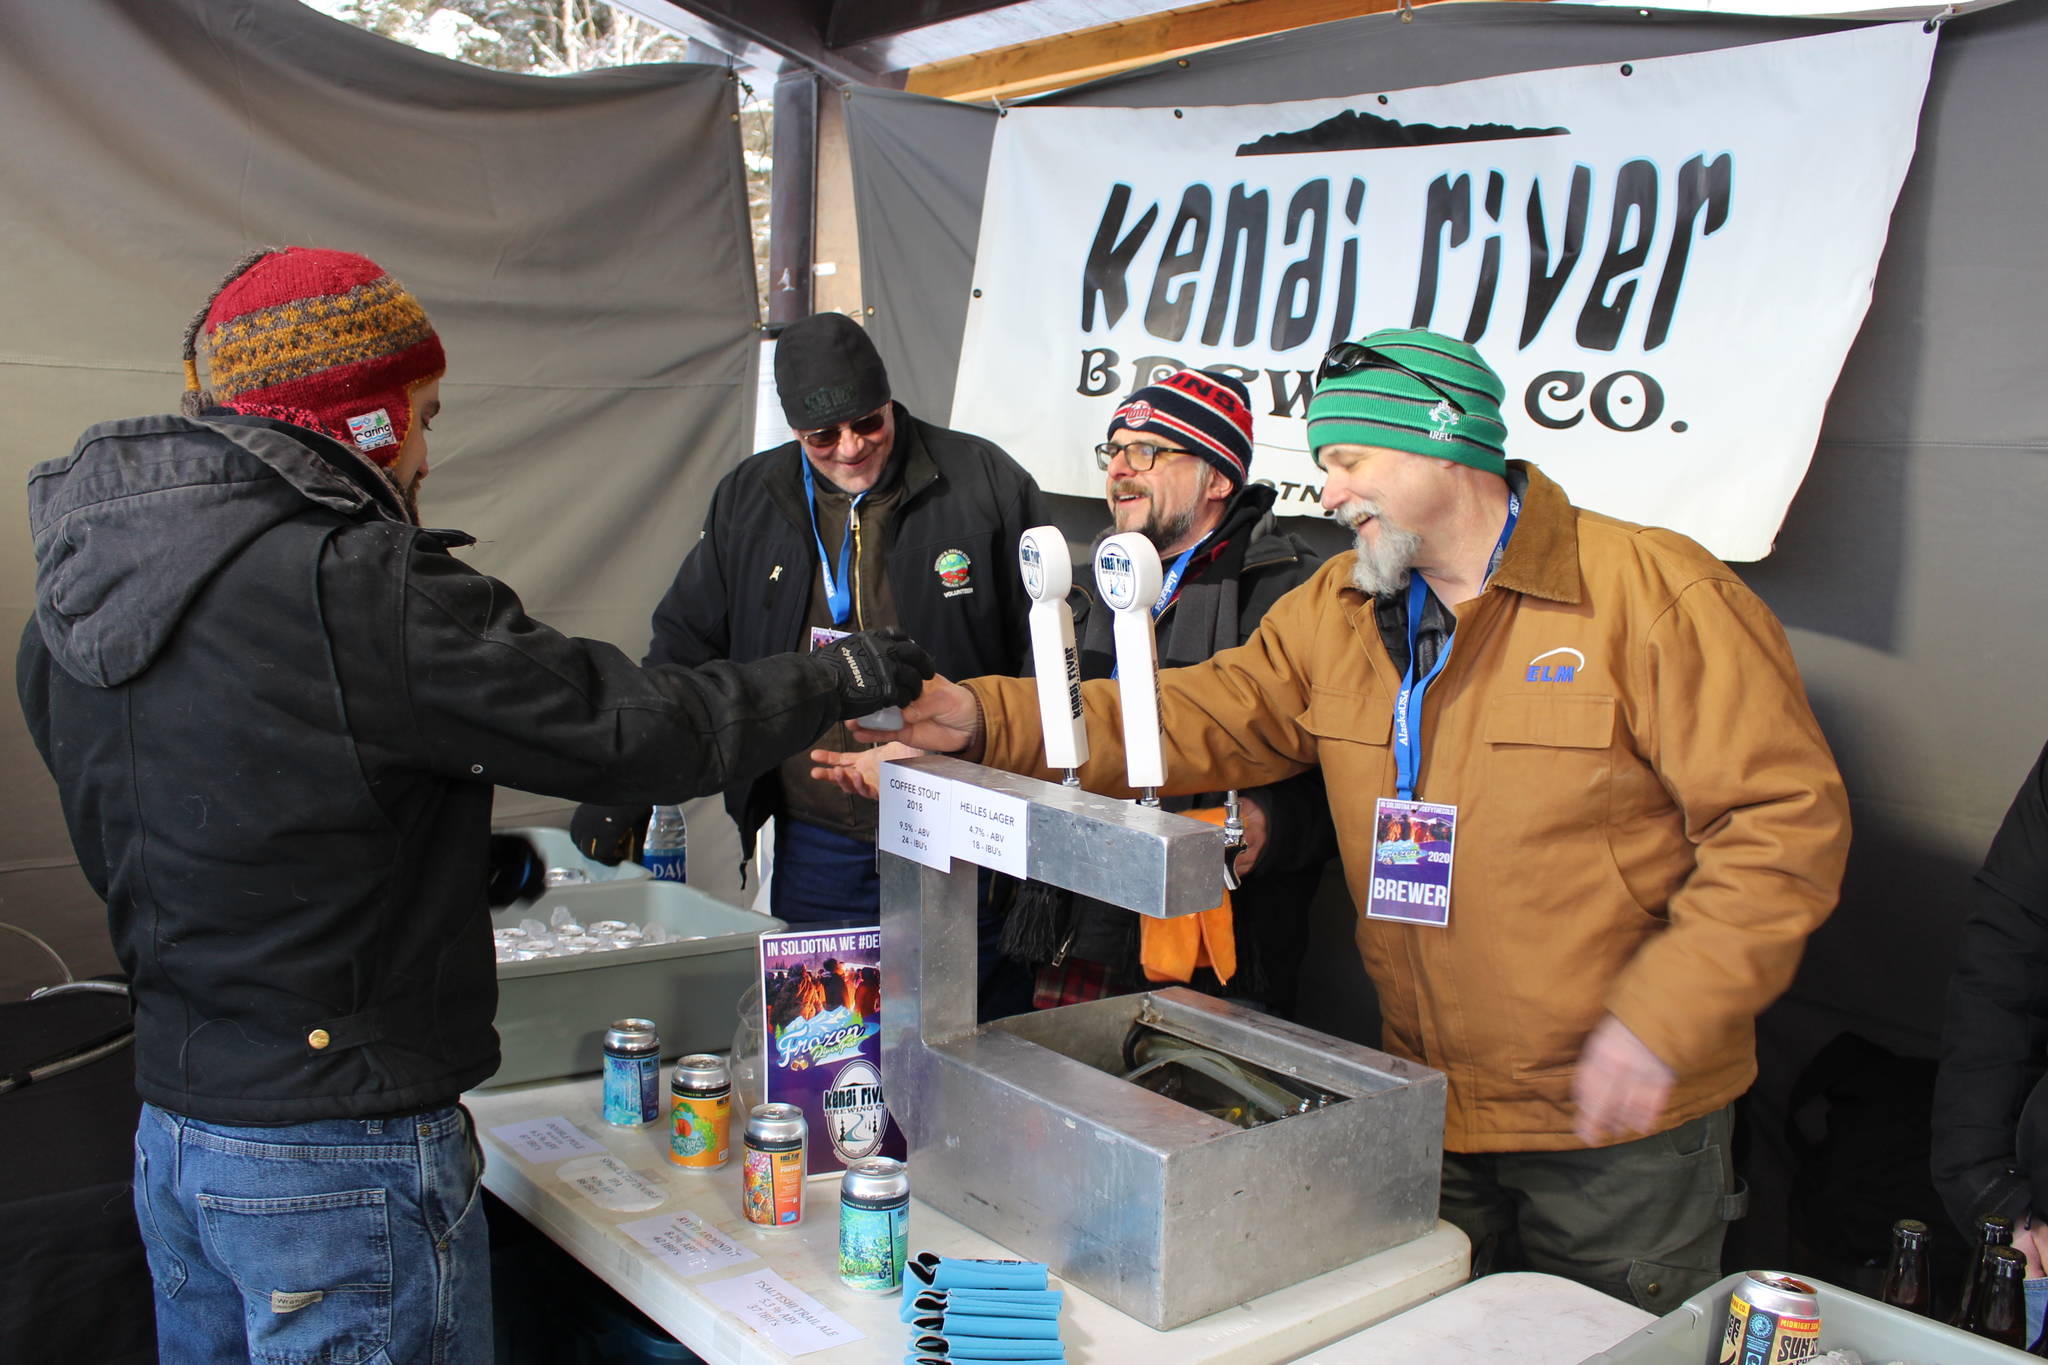 Sean Owens, right, serves up a Tsalteshi Trail Ale to Nate Mole, left, during the 2020 Frozen RiverFest at Soldotna Creek Park in Soldotna, Alaska on Feb. 15, 2020. (Photo by Brian Mazurek/Peninsula Clarion)